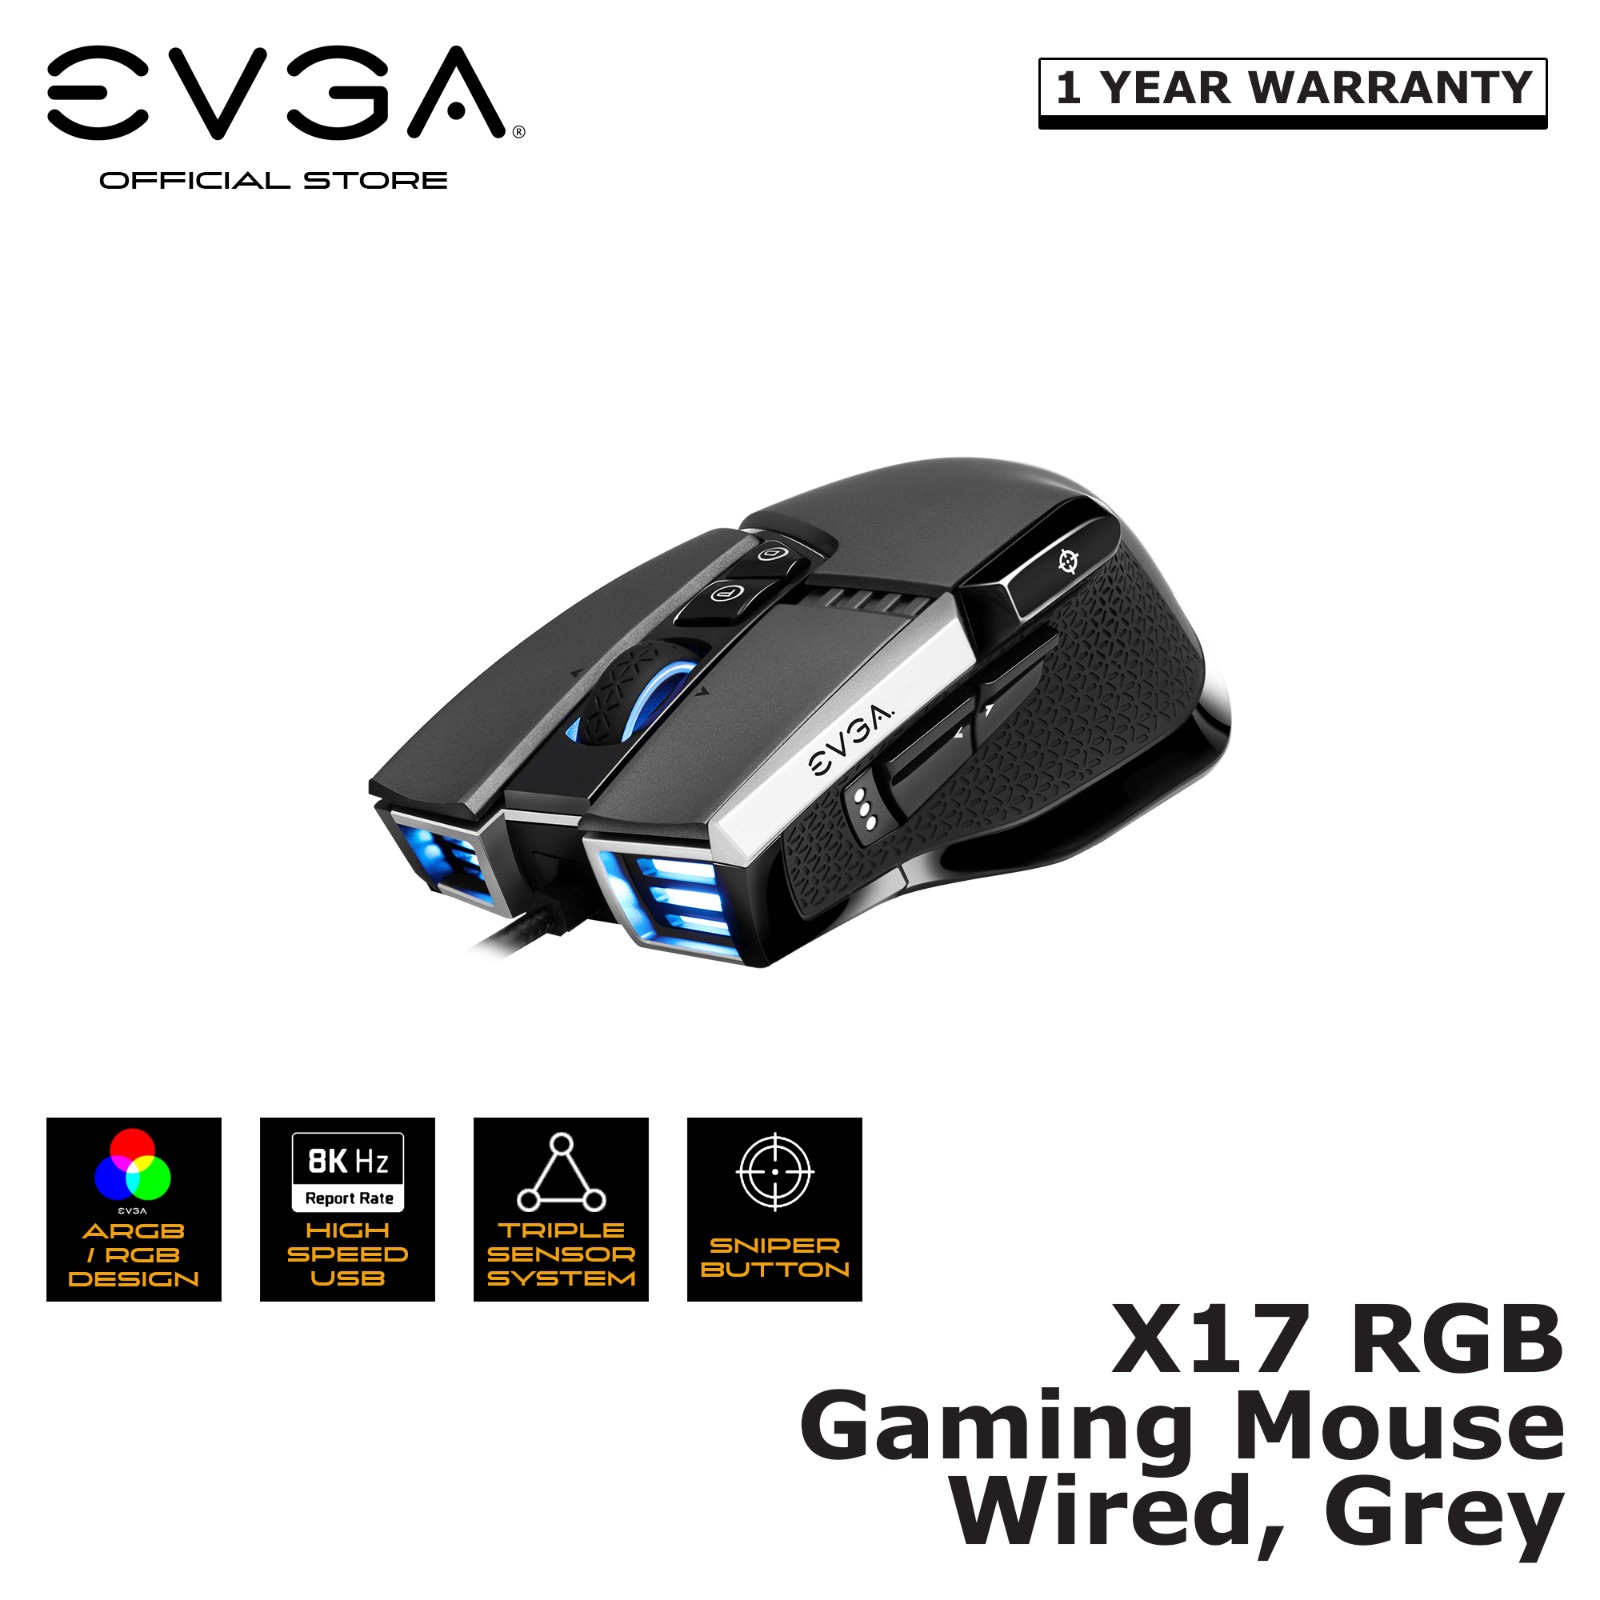 EVGA X17 Gaming Mouse, Wired, Black / Grey , Customizable, 16,000